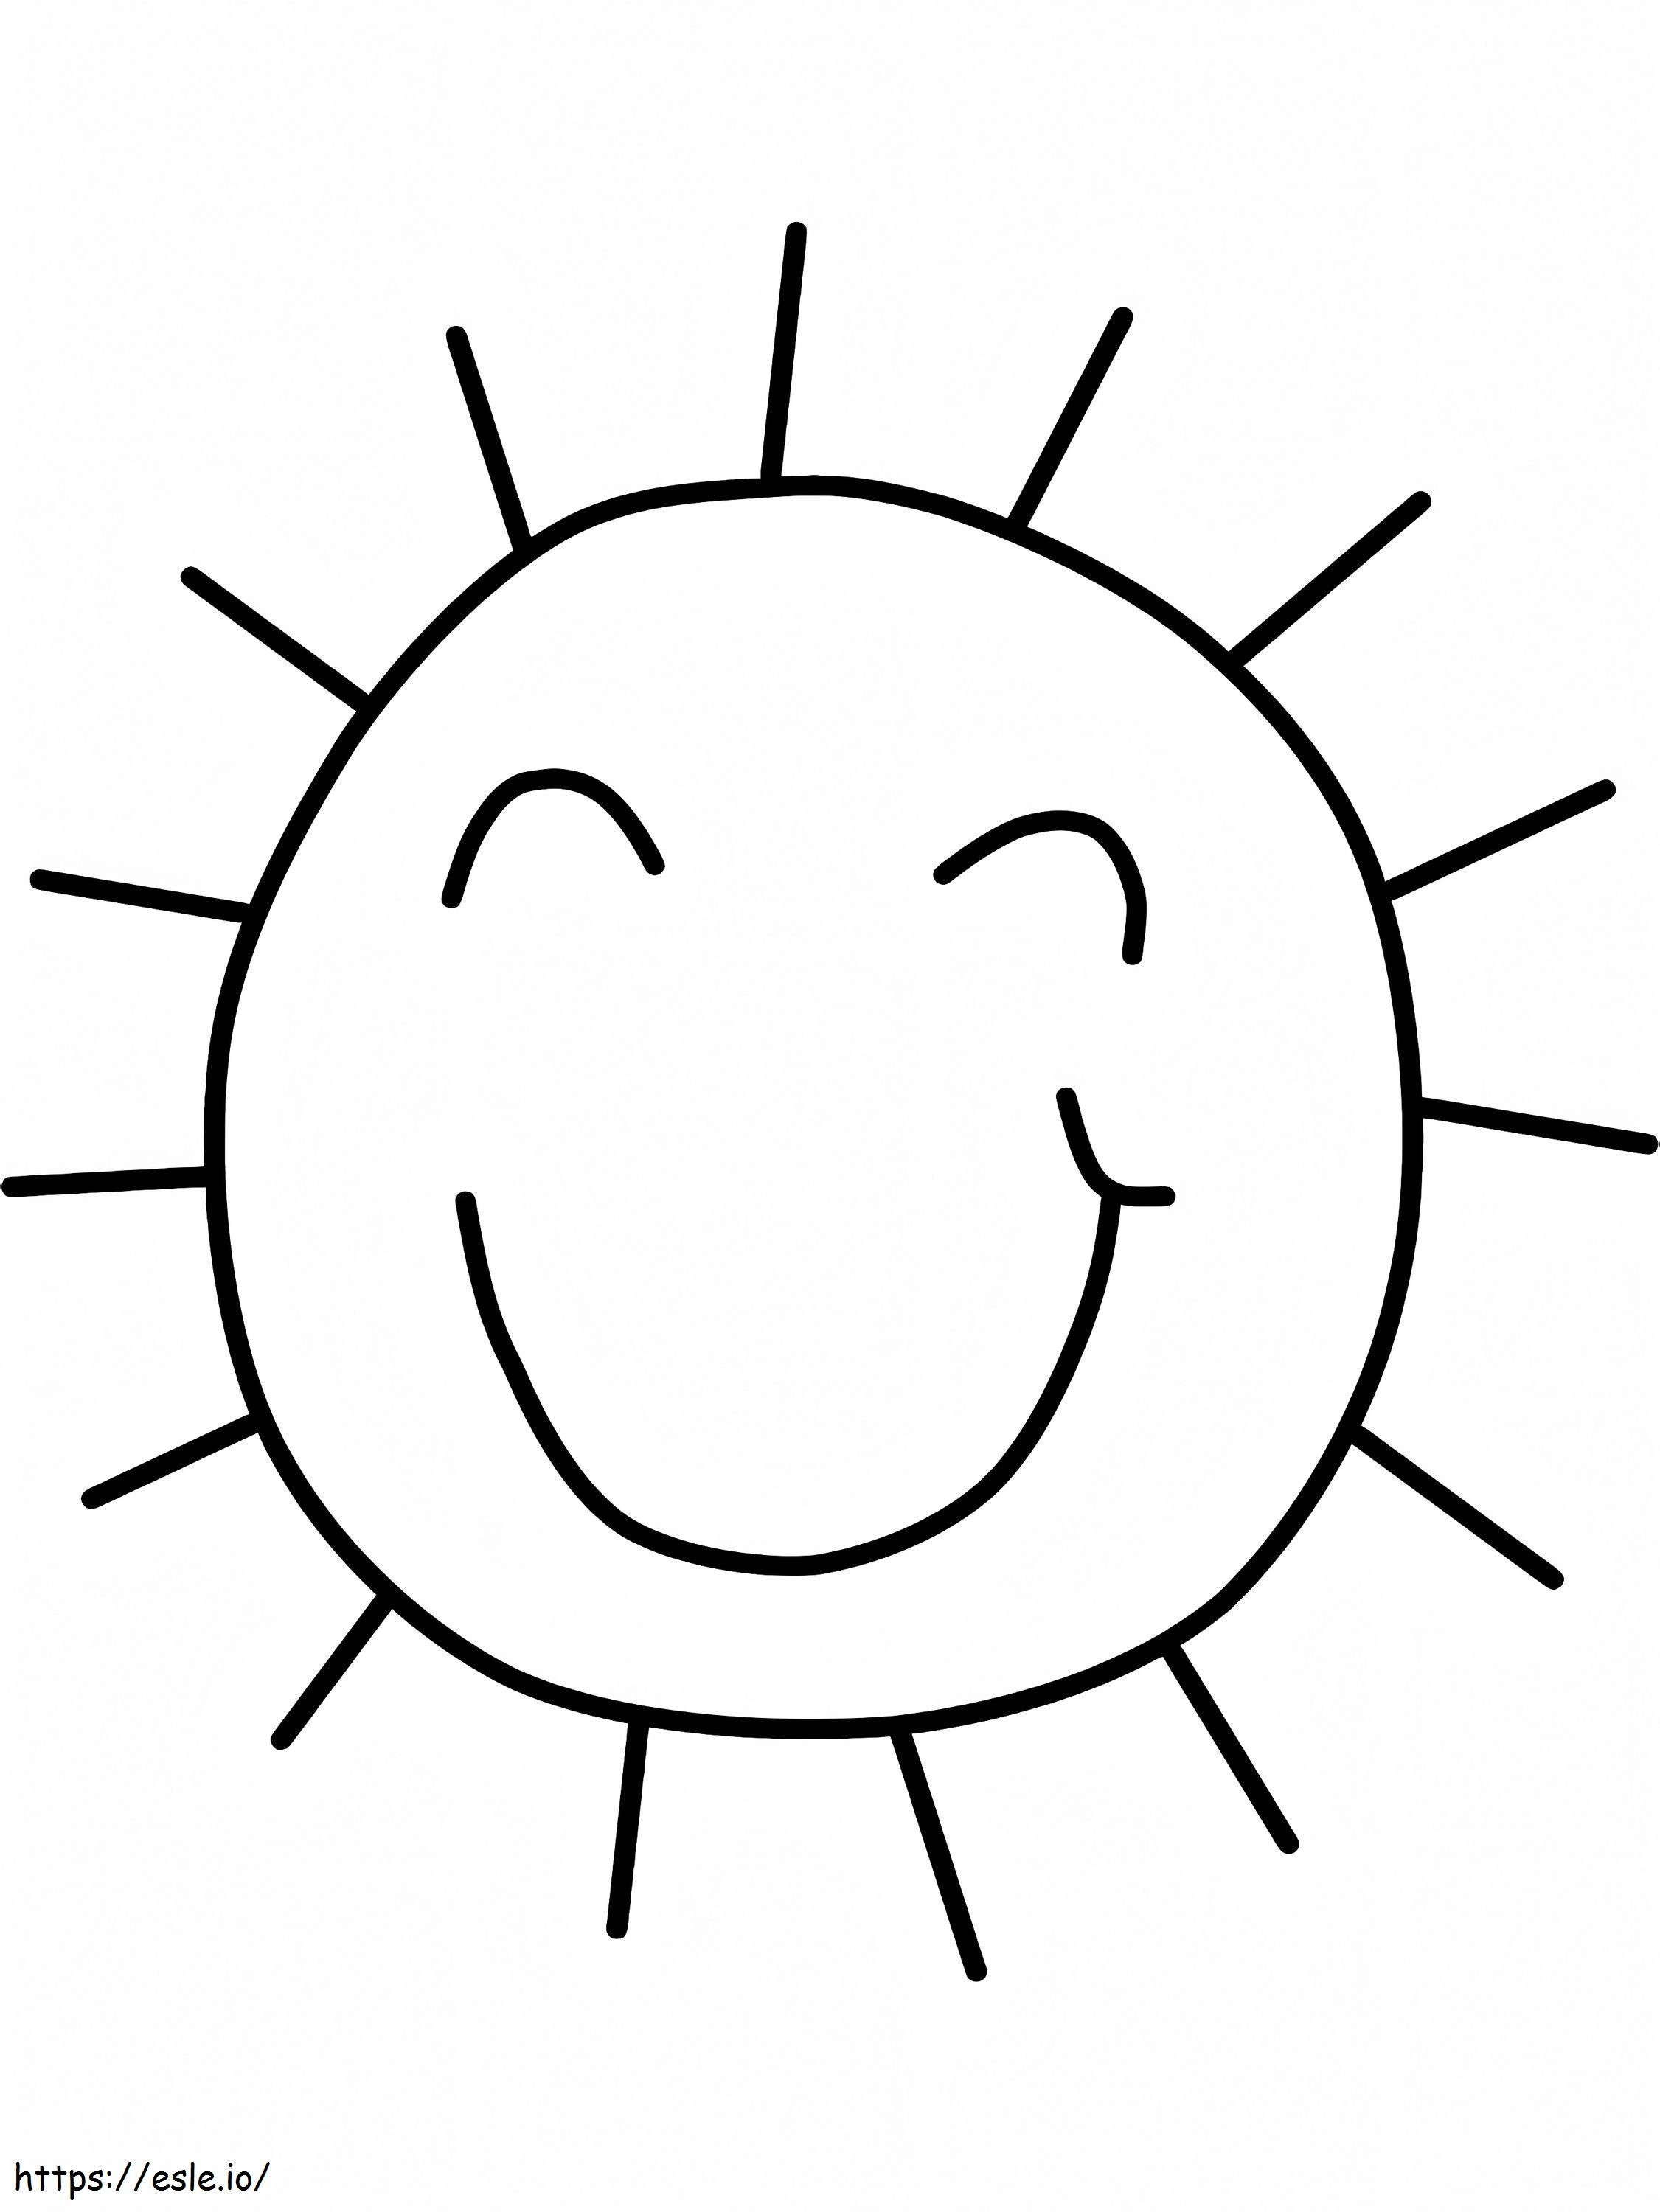 Simple Sun Smiling coloring page